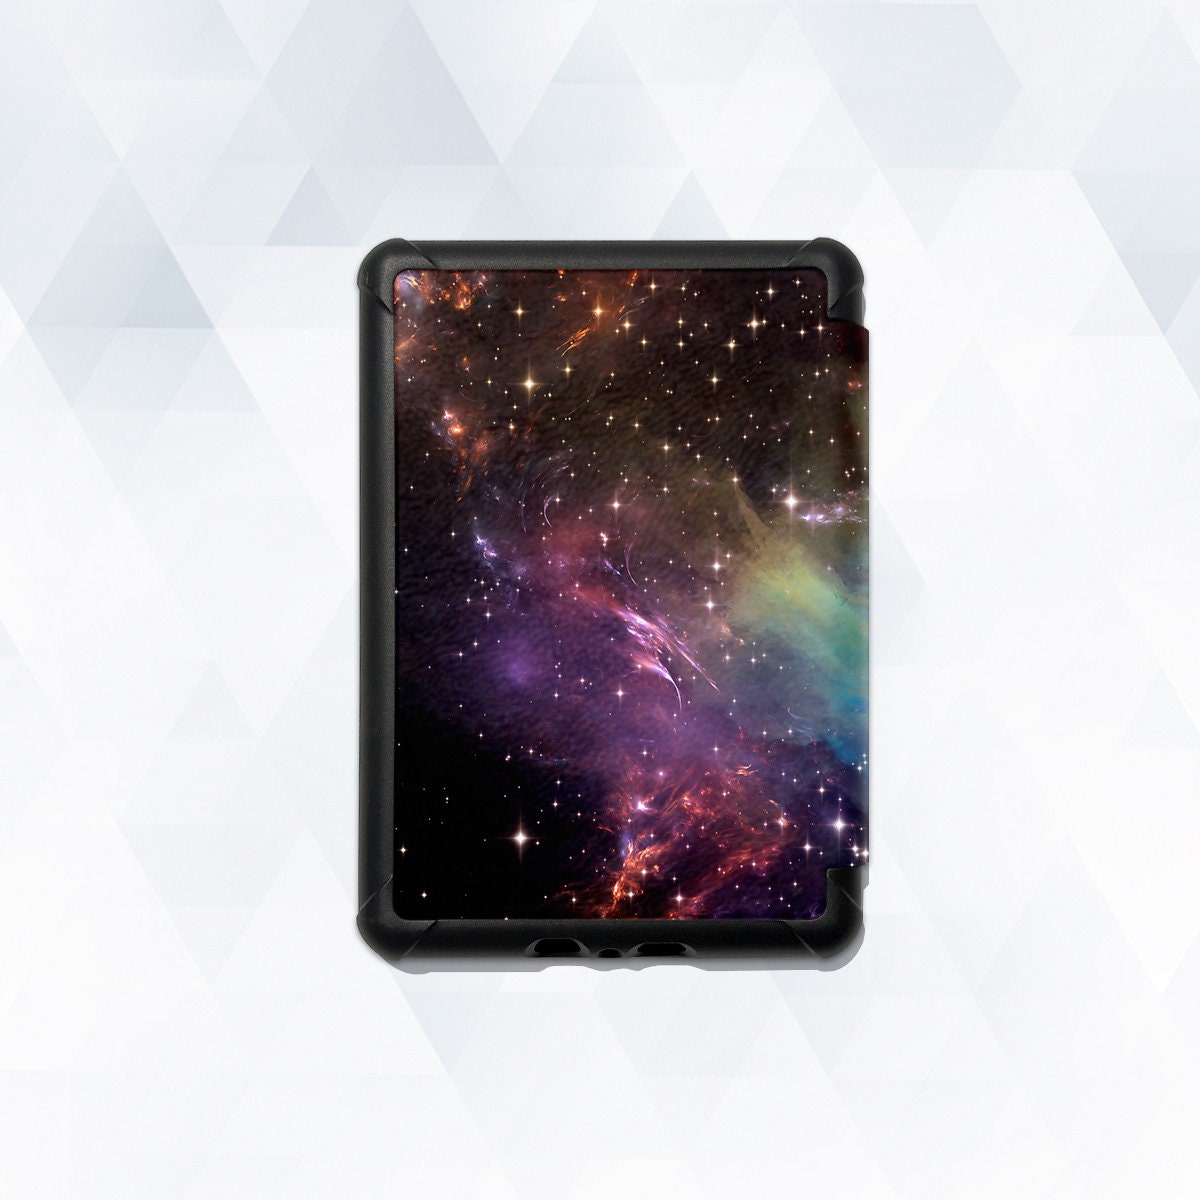 Space Kindle Case Galaxy Aesthetic All-new Kindle 10th Gen Kindle  Paperwhite 10th 2019 6 Stars Universe Purple Cloud Space Kindle Cover -   Denmark